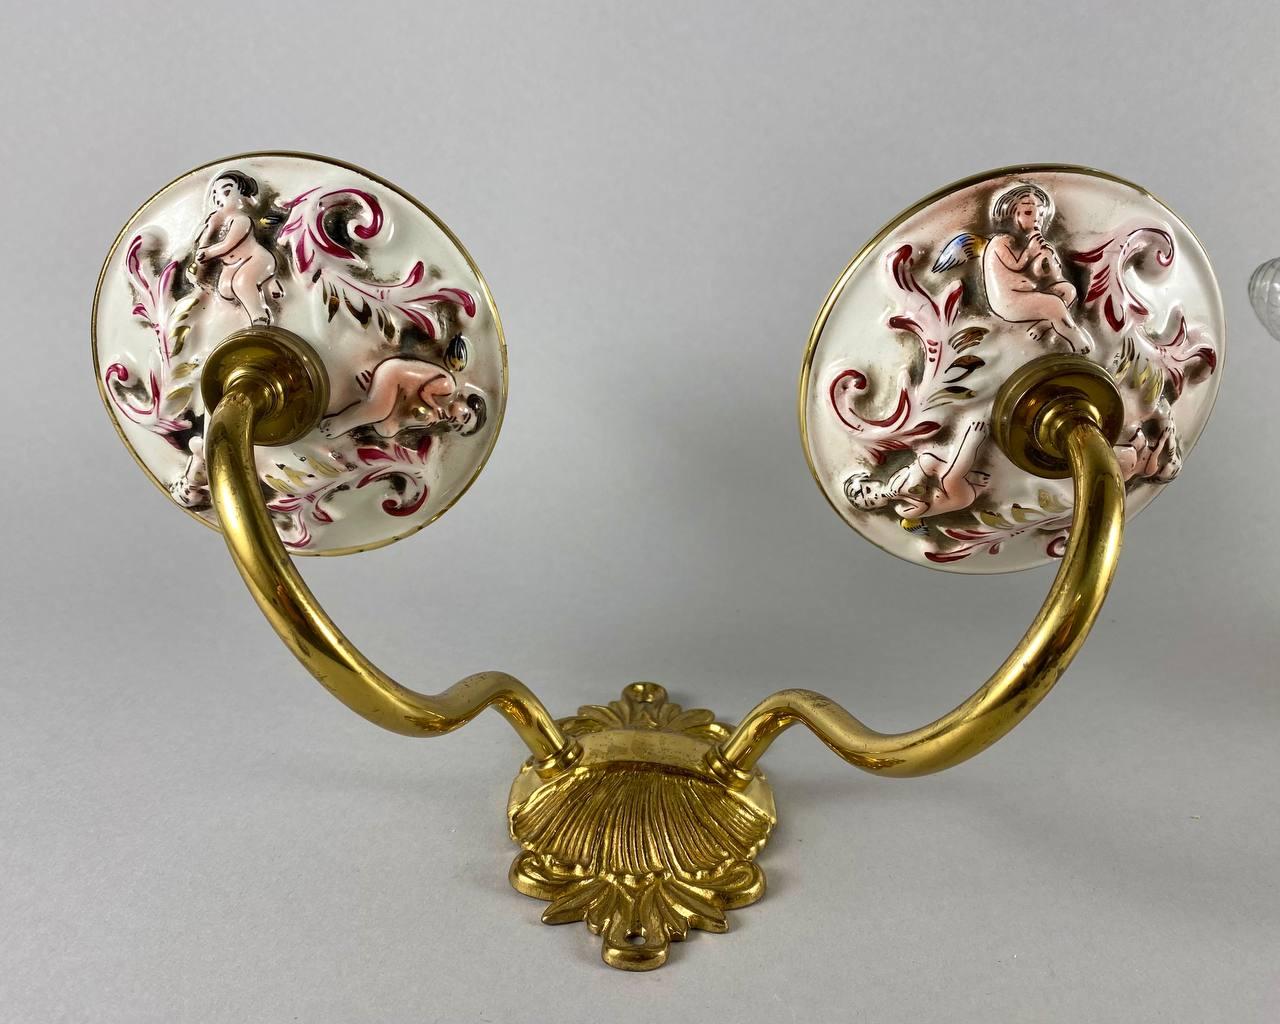 Metal Vintage Capodimonte Porcelain Wall Sconces with Putti and Floral Pattern, 1980 For Sale